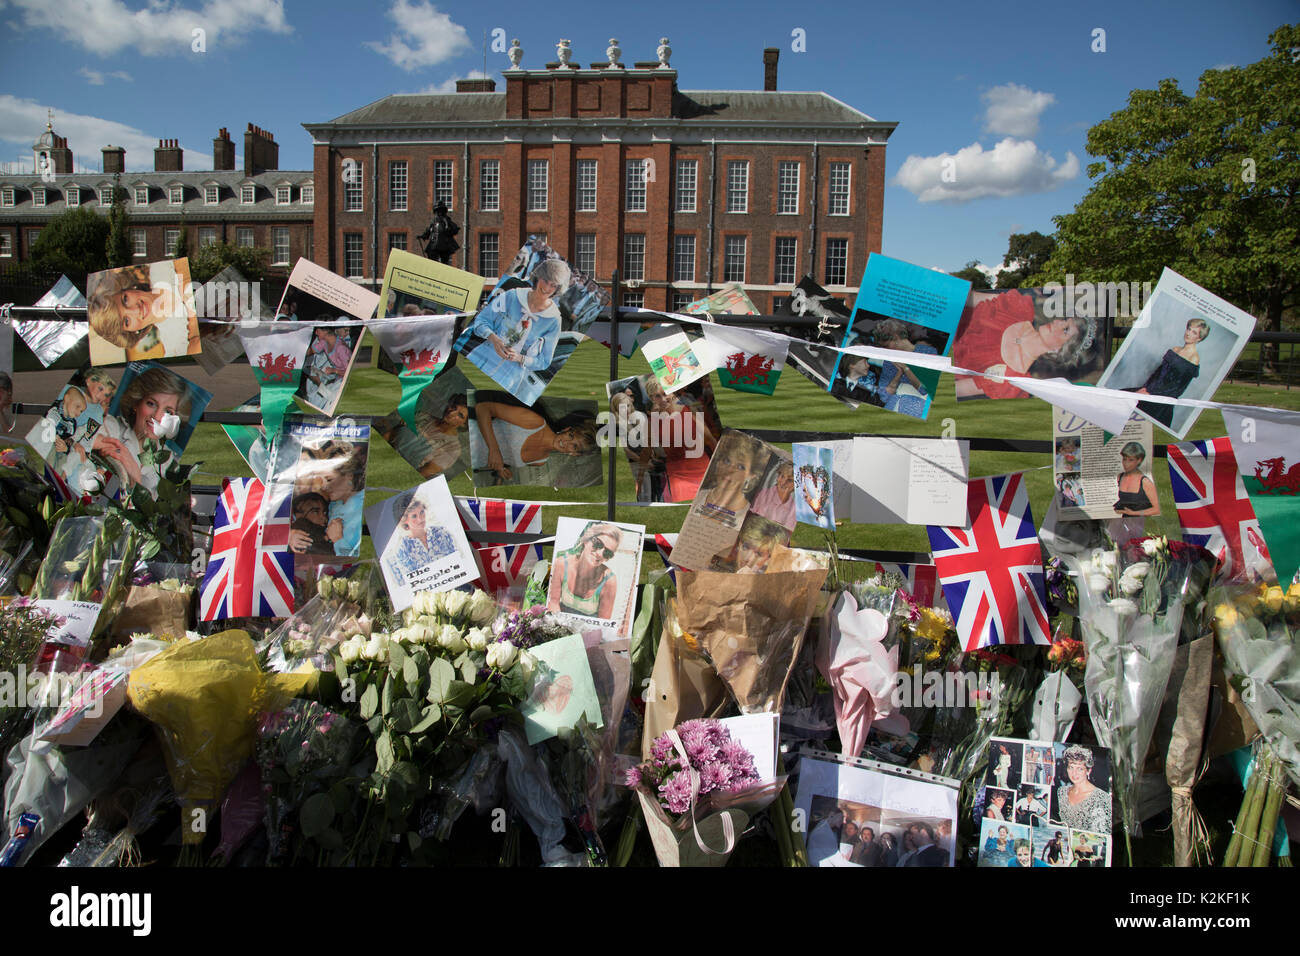 On the 20th anniversary of the death of Princess Diana, crowds of people gather to pay their respects, and to lay flowers, pictures and messages at the memorial to her on 31st August 2017 at Kensington Palace in London, United Kingdom. Diana, Princess of Wales became known as the People's Princess following her tragic death, and now as in 1997, thousands of royalists, and mourners came to her royal residence in remembrance. Stock Photo